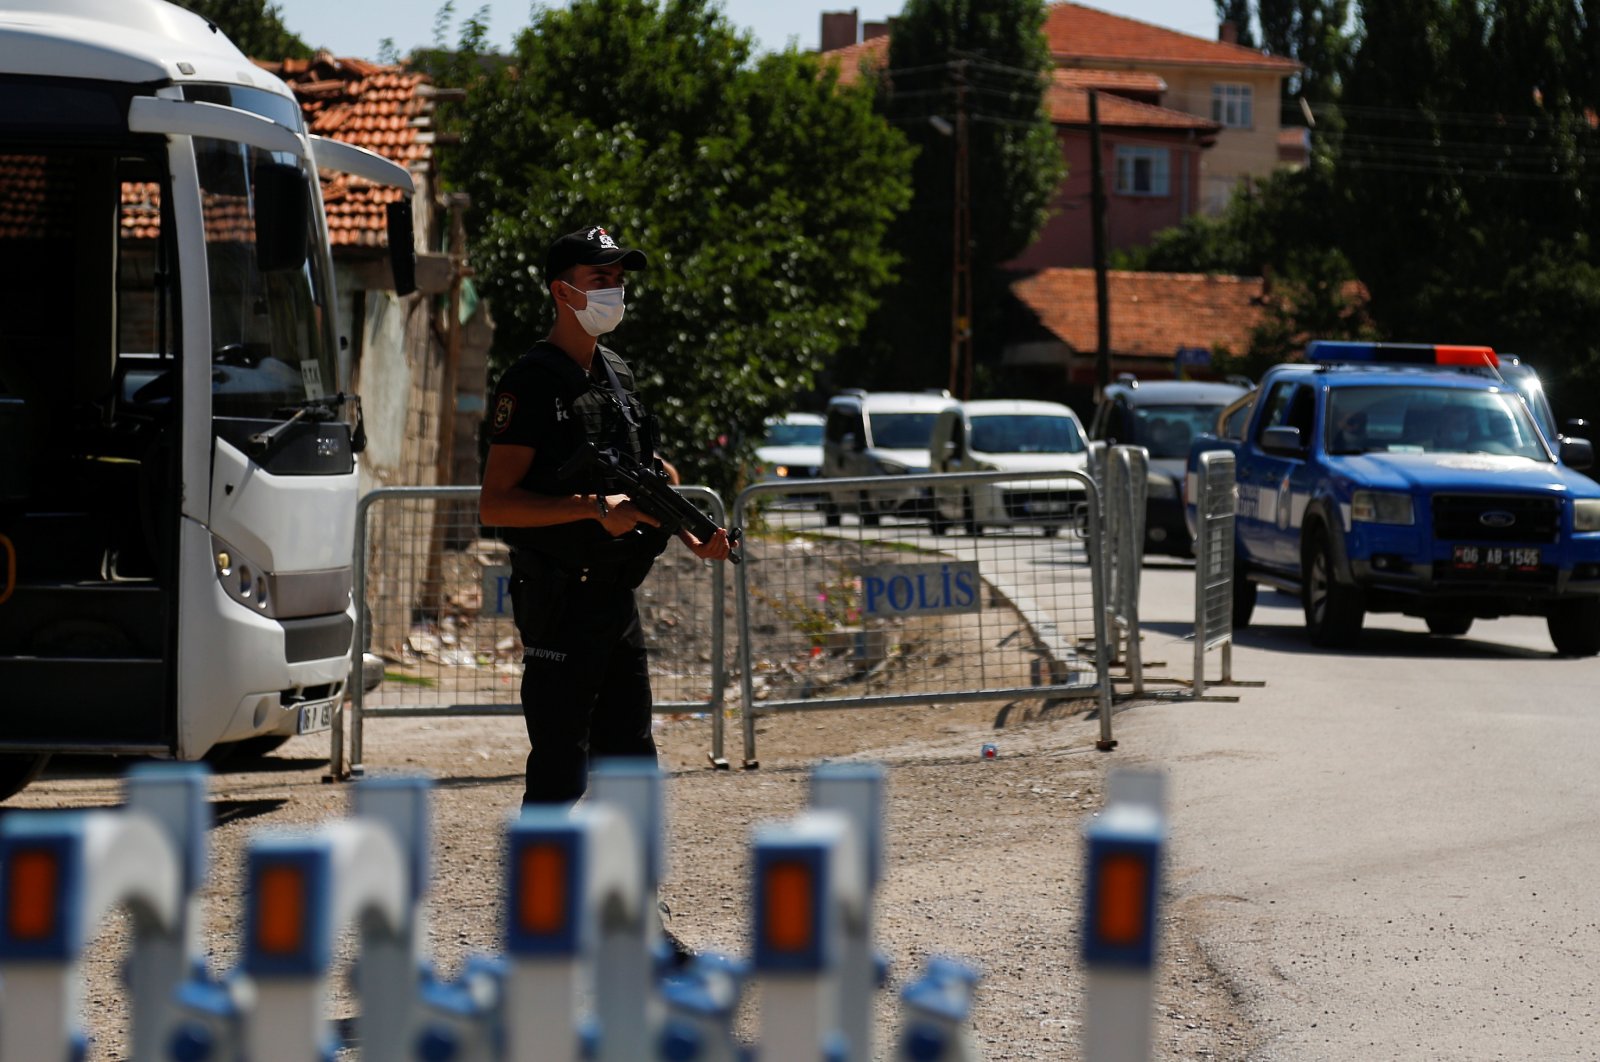 A Turkish riot police member stands guard at a checkpoint on a road which leads to a neighborhood where many Syrian refugees have houses and shops, in Ankara, Turkey, Aug. 12, 2021. (REUTERS Photo)